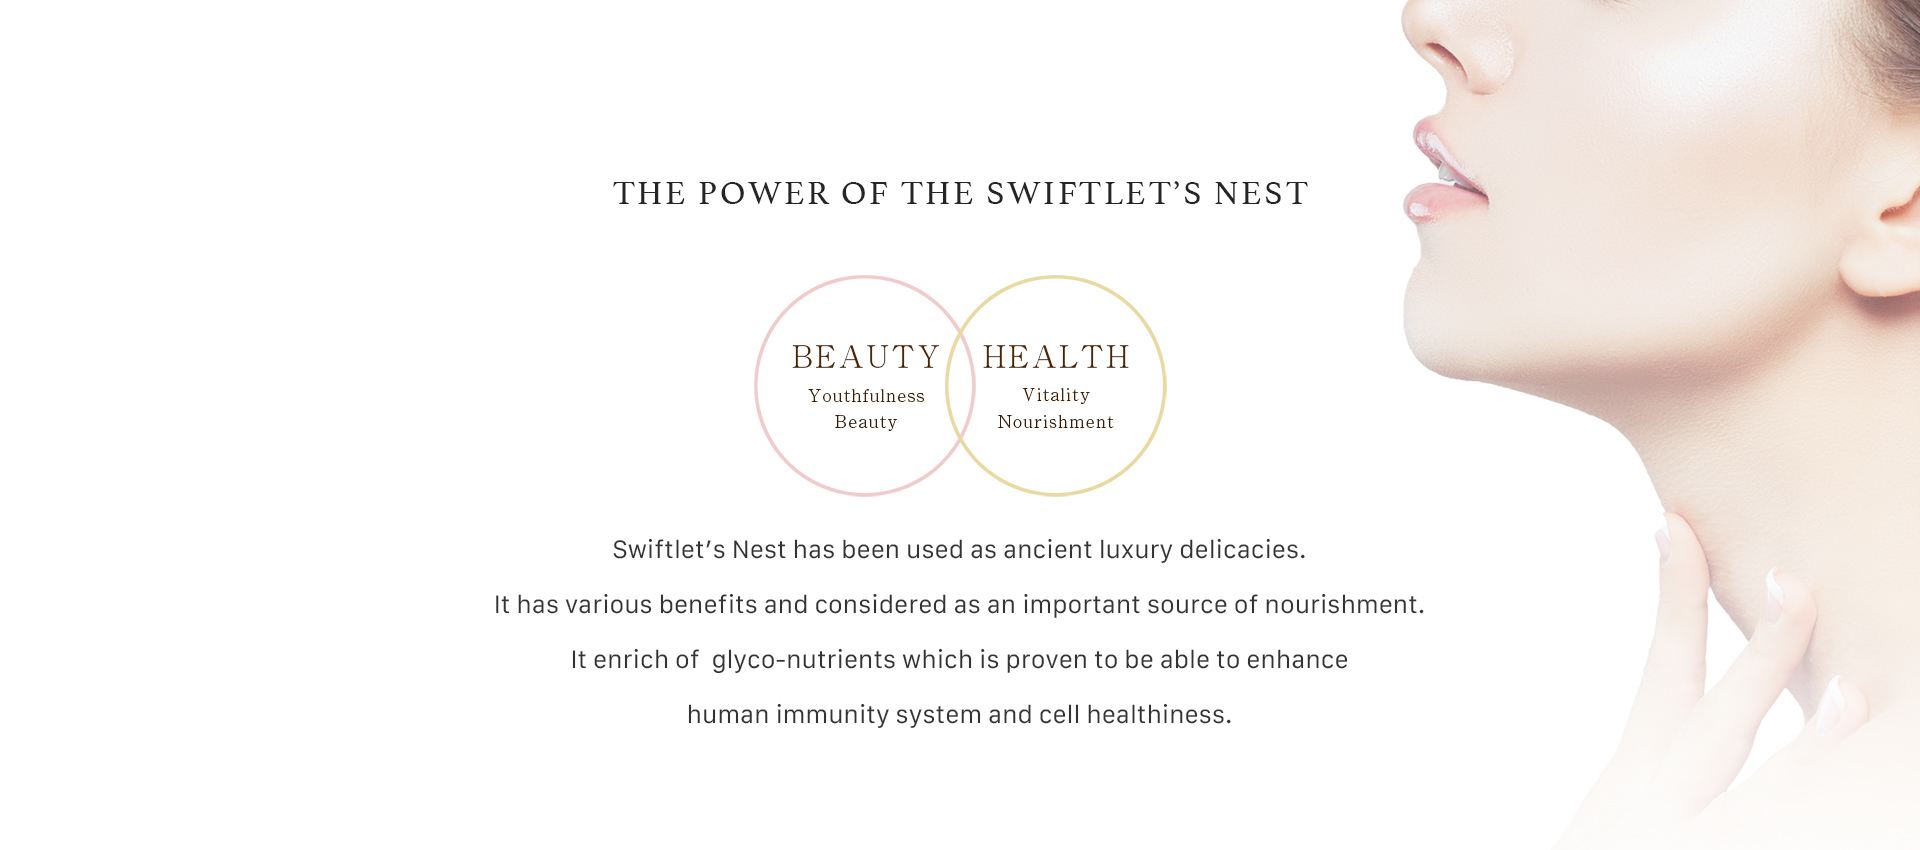 Mysterious power of swiftlet's nest